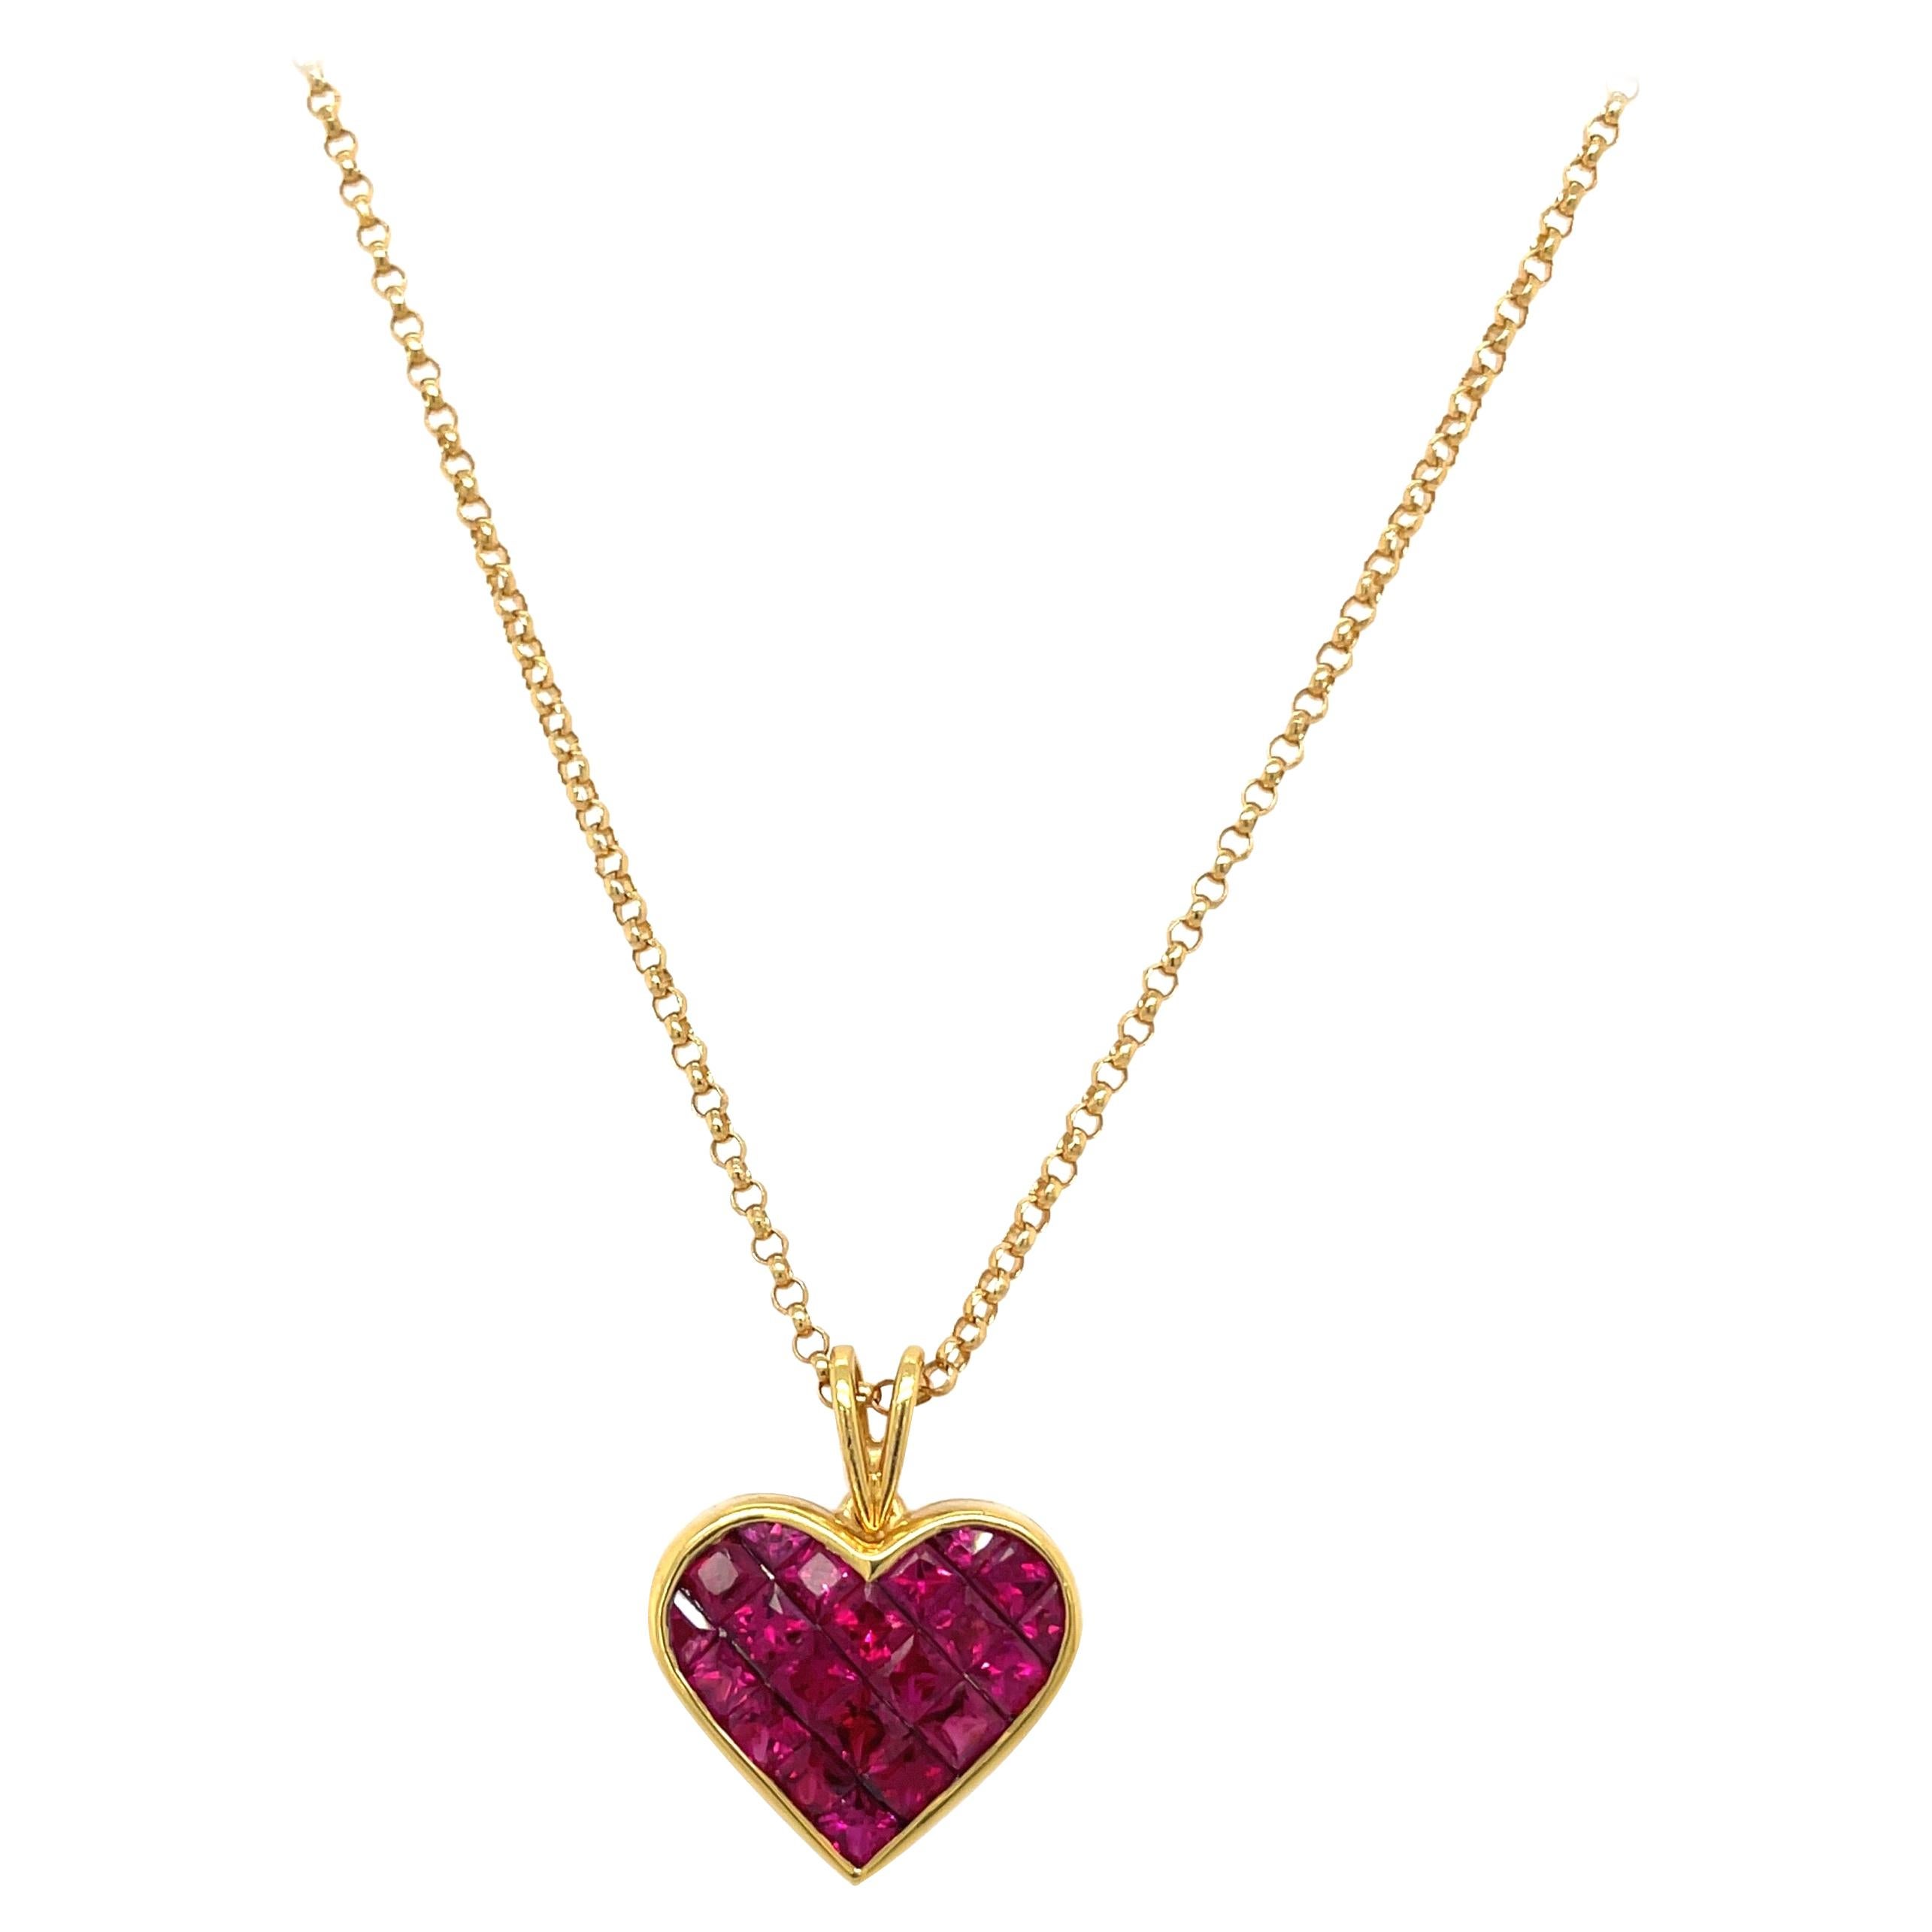 Quadrillion 18kt Yellow Gold 2.41 Ct Ruby Heart Pendant Necklace